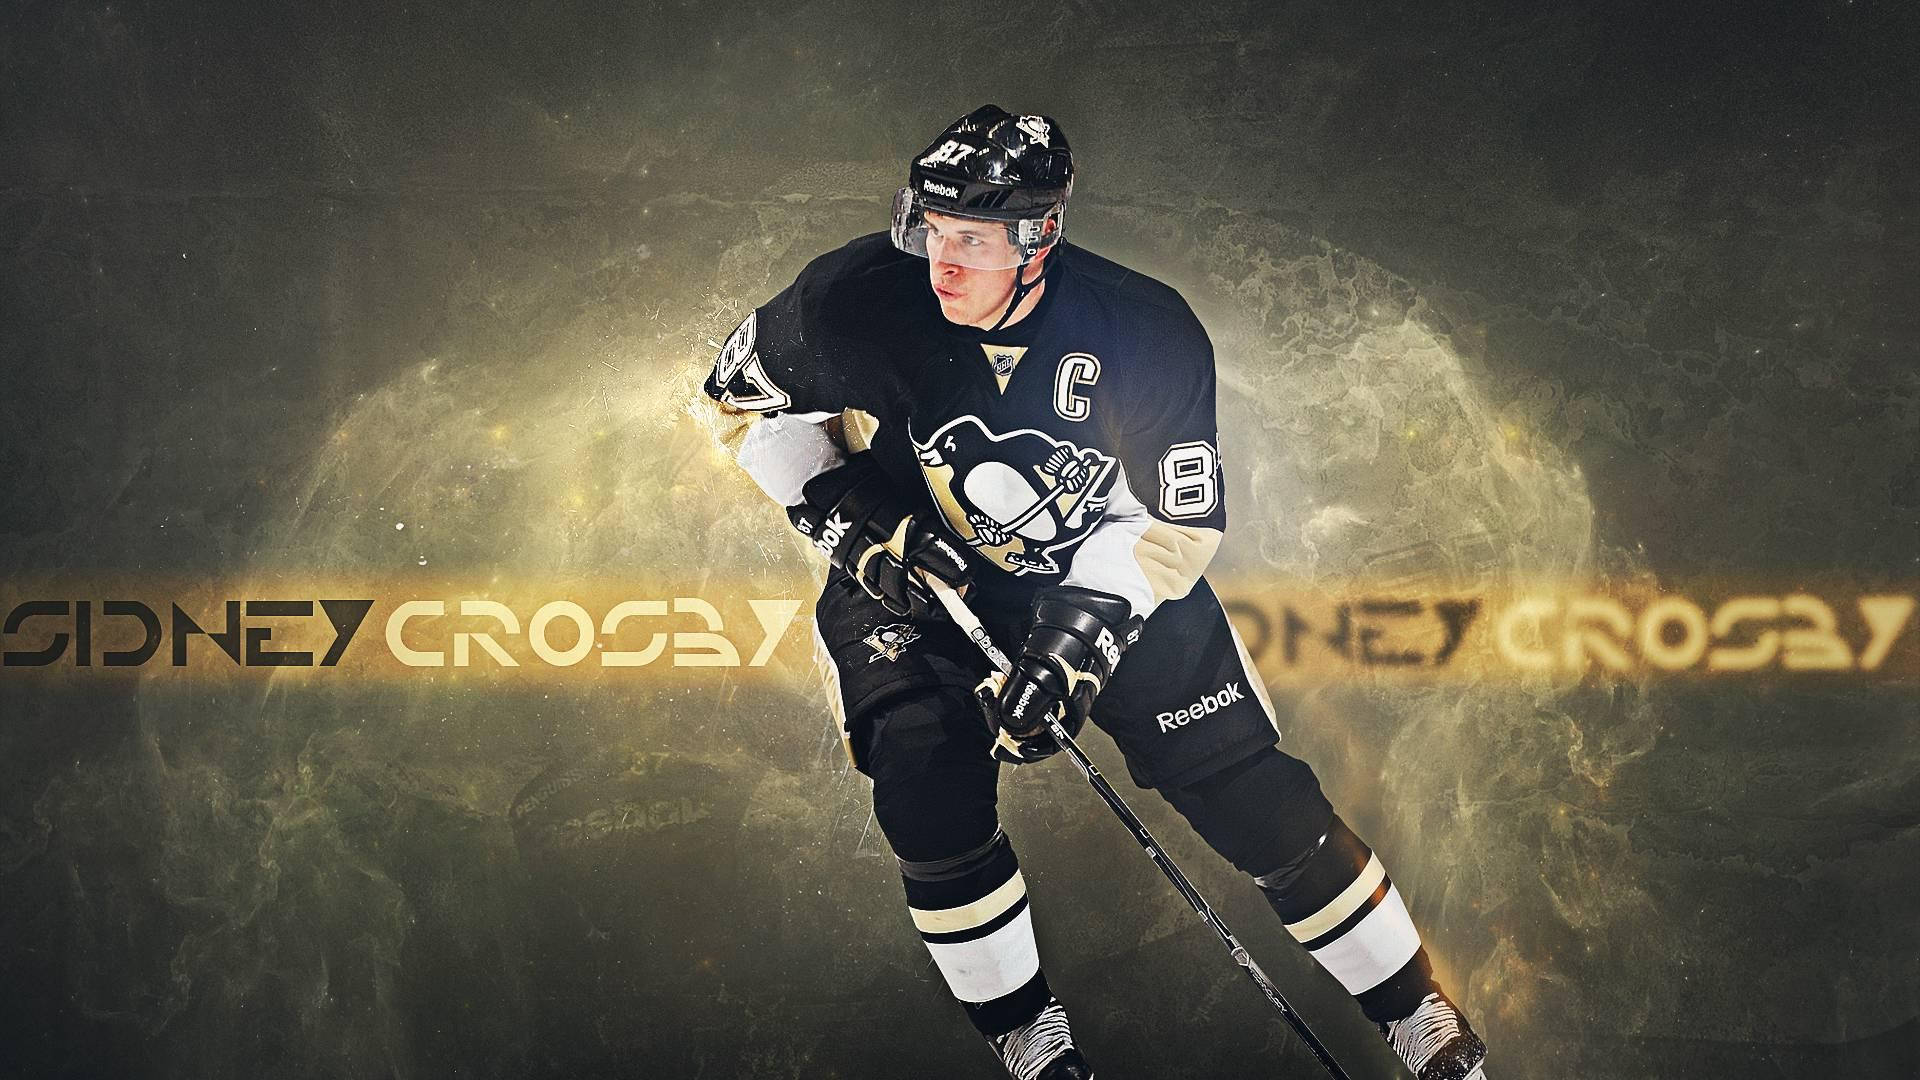 Pittsburghpenguins Crosby 87 Can Be Translated To 